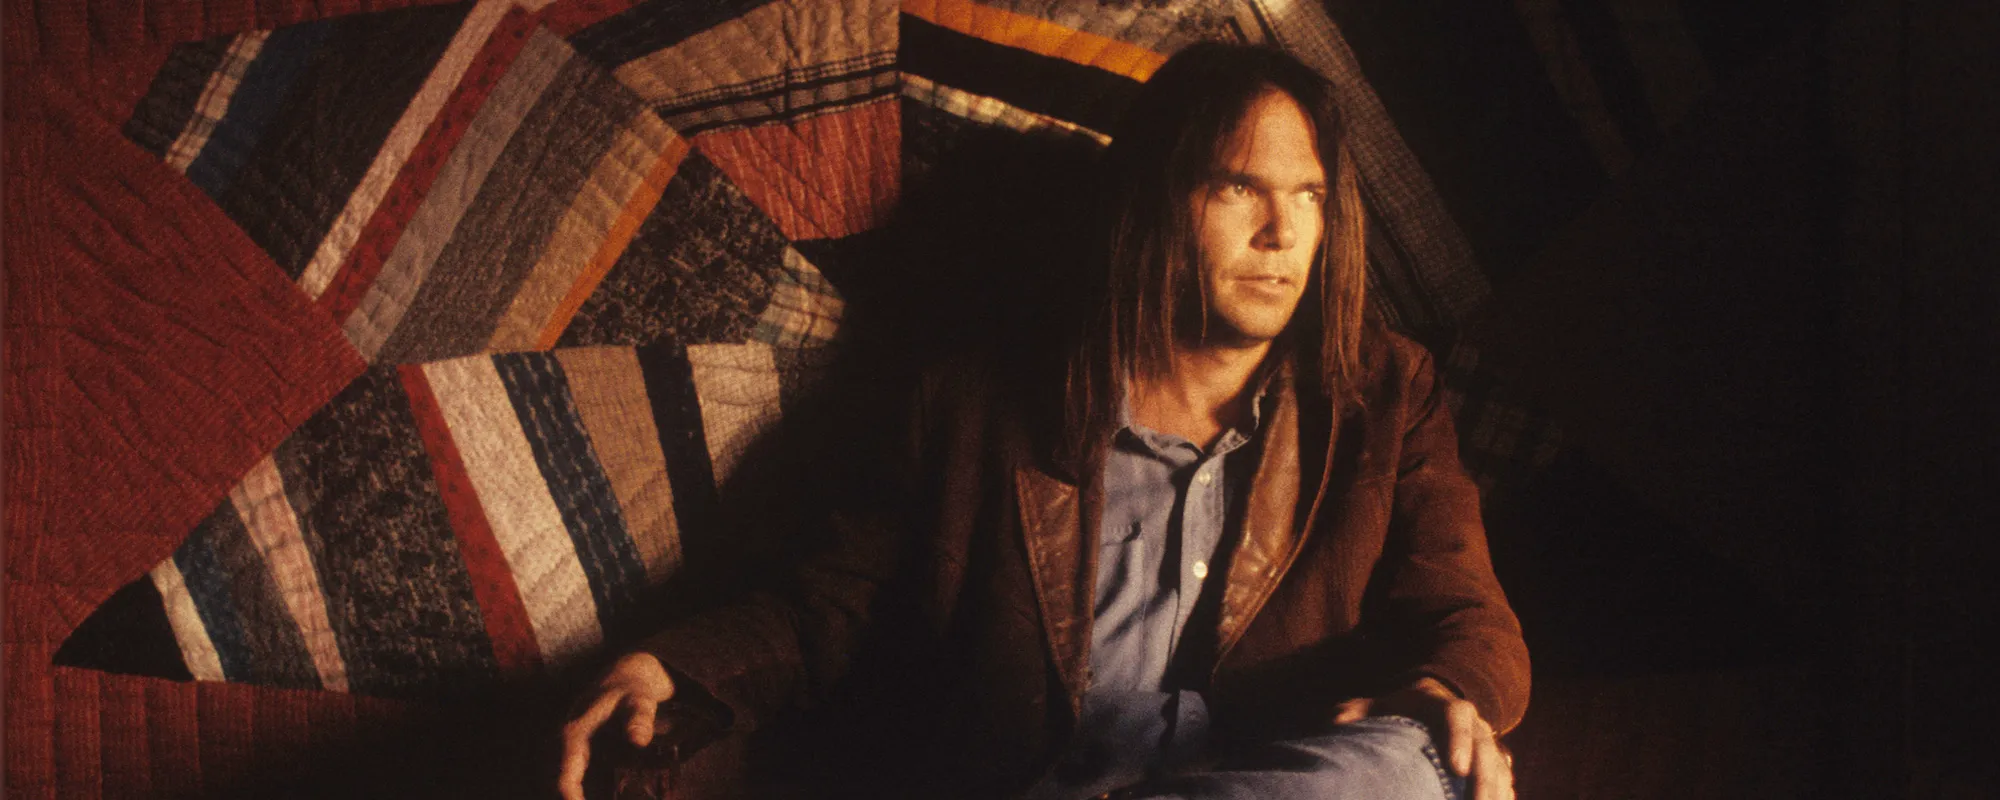 Neil Young Releases Surprise New Album on Christmas: ‘Summer Songs’